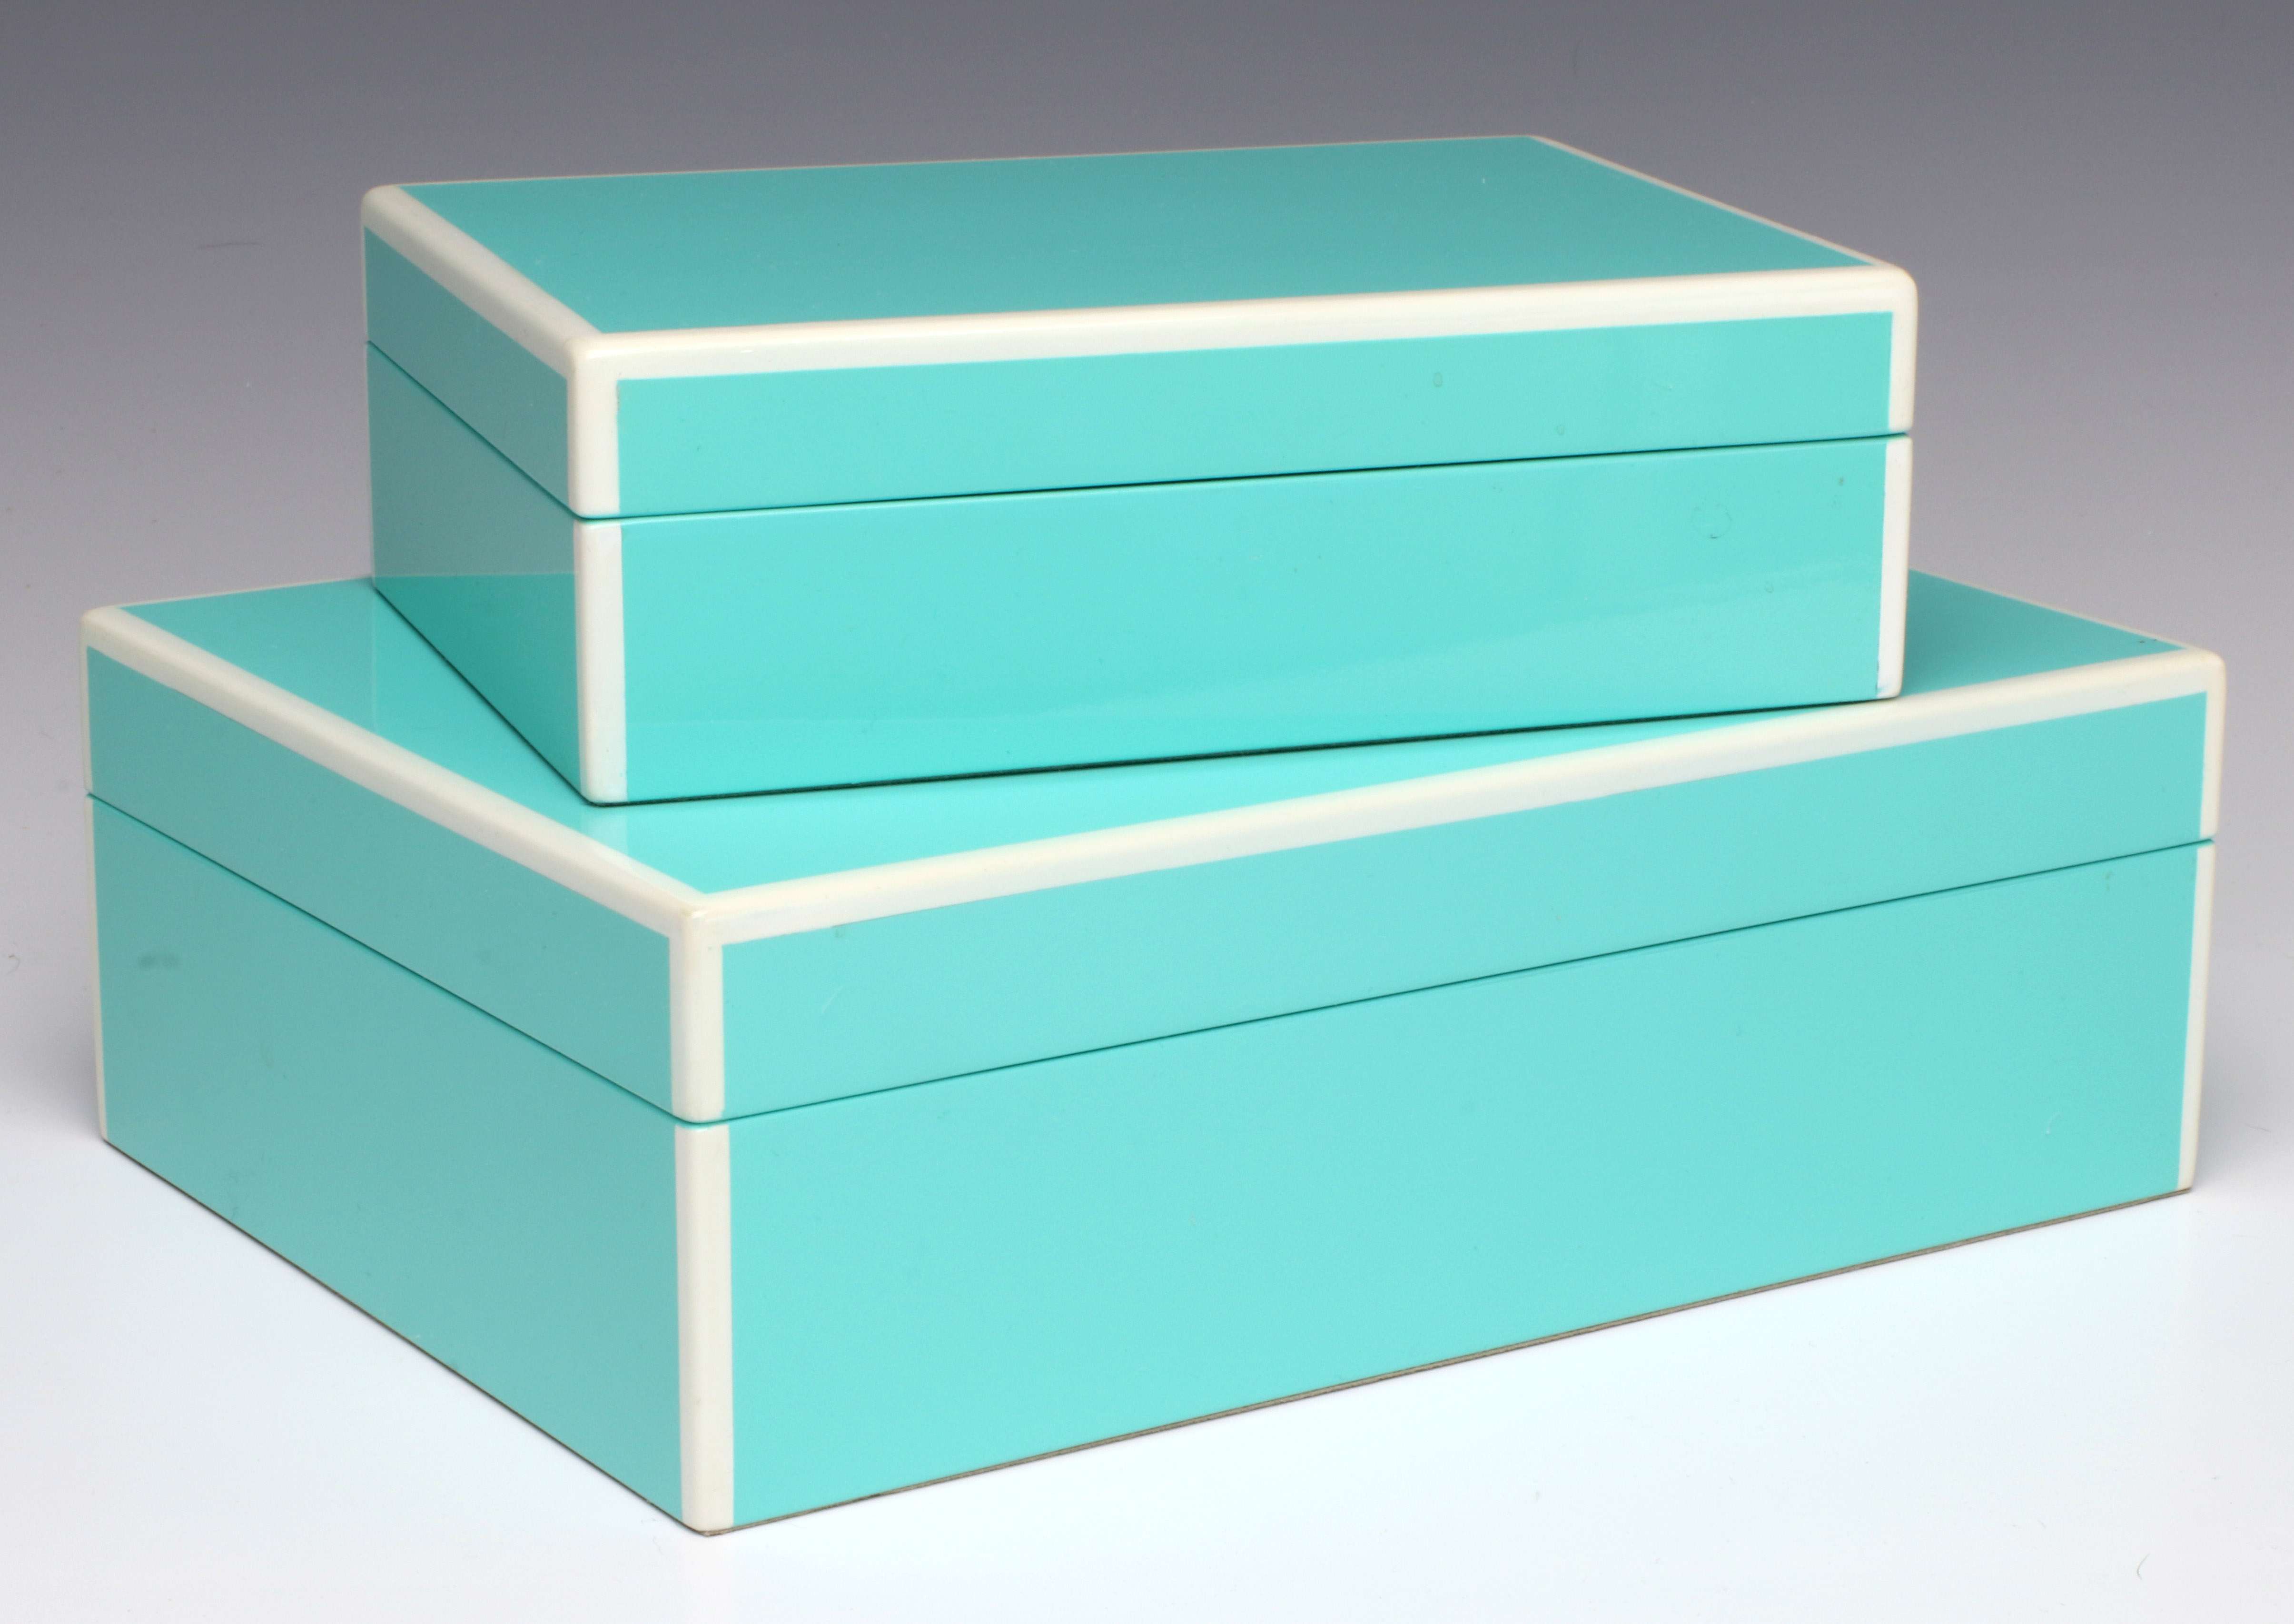 FOUR STYLISH CONTEMPORARY STORAGE BOXES